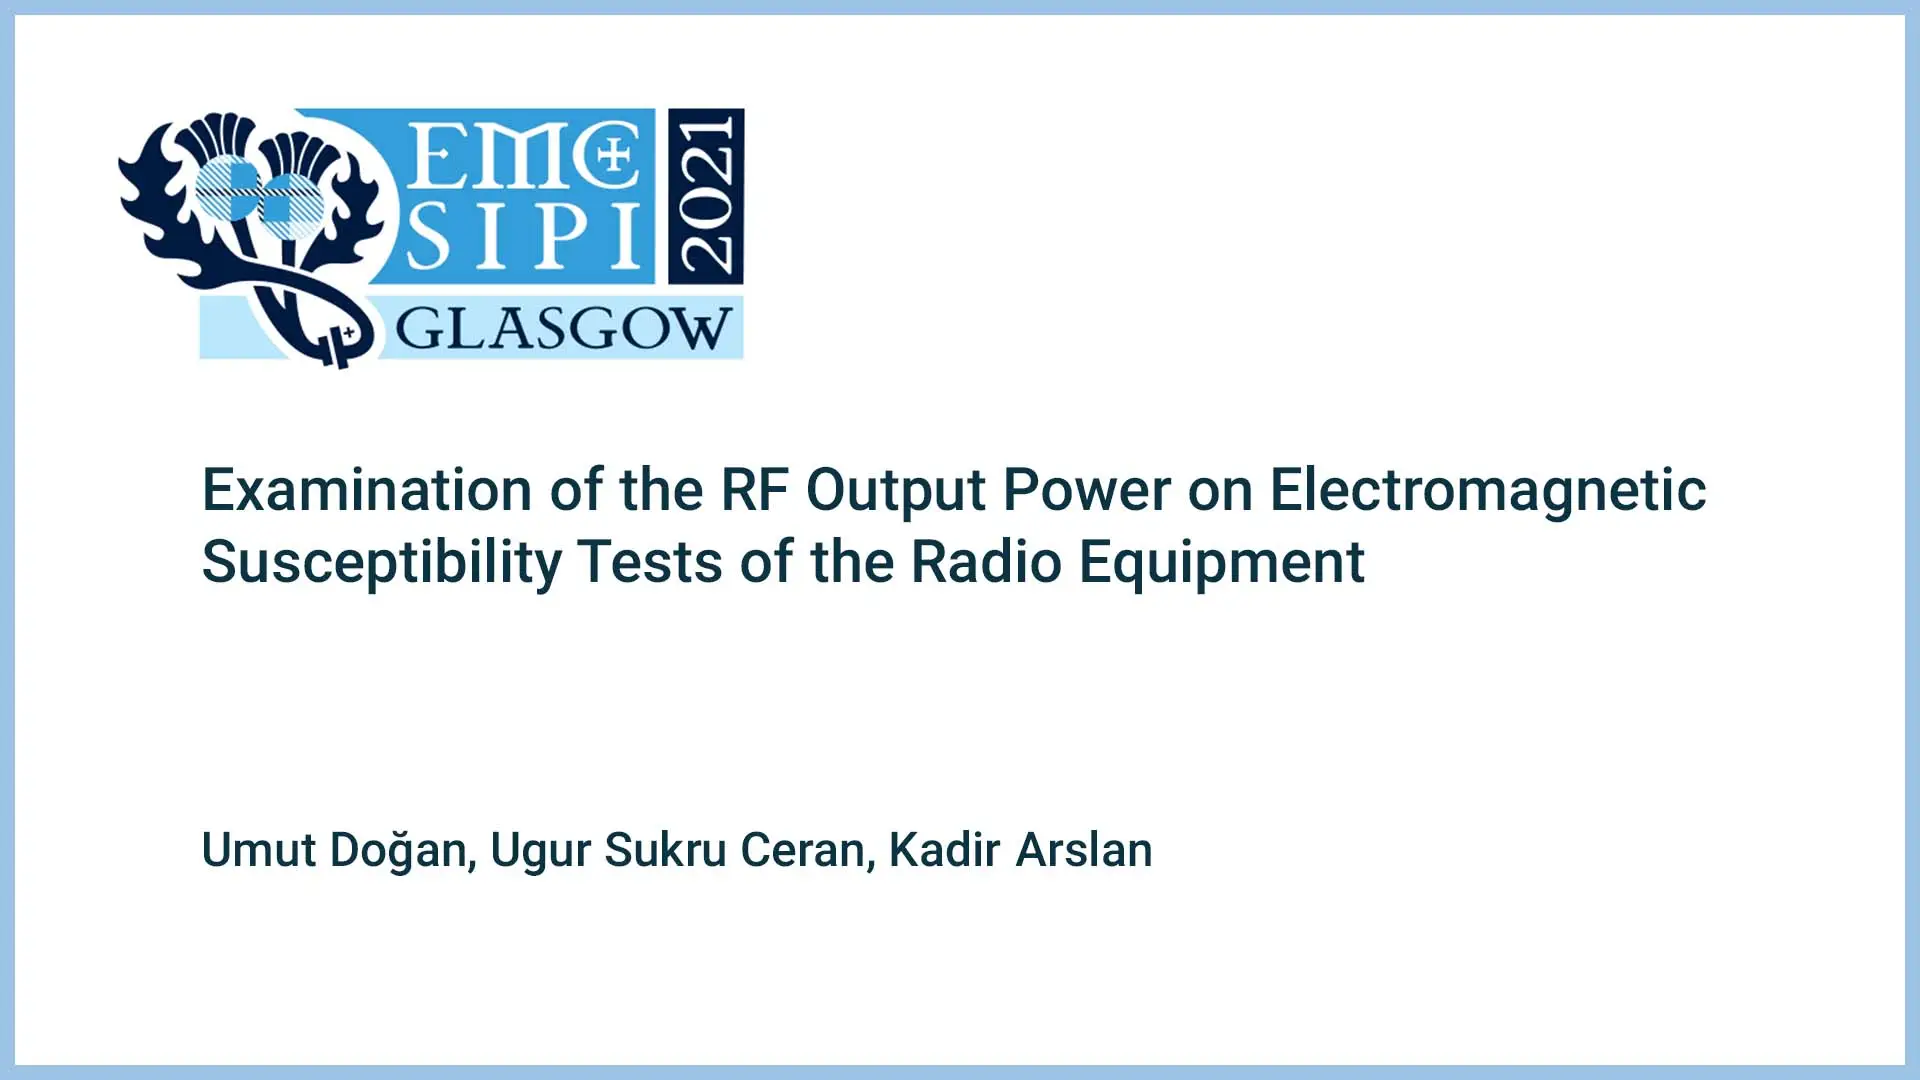 Examination of the RF Output Power on Electromagnetic Susceptibility Tests of the Radio Equipment